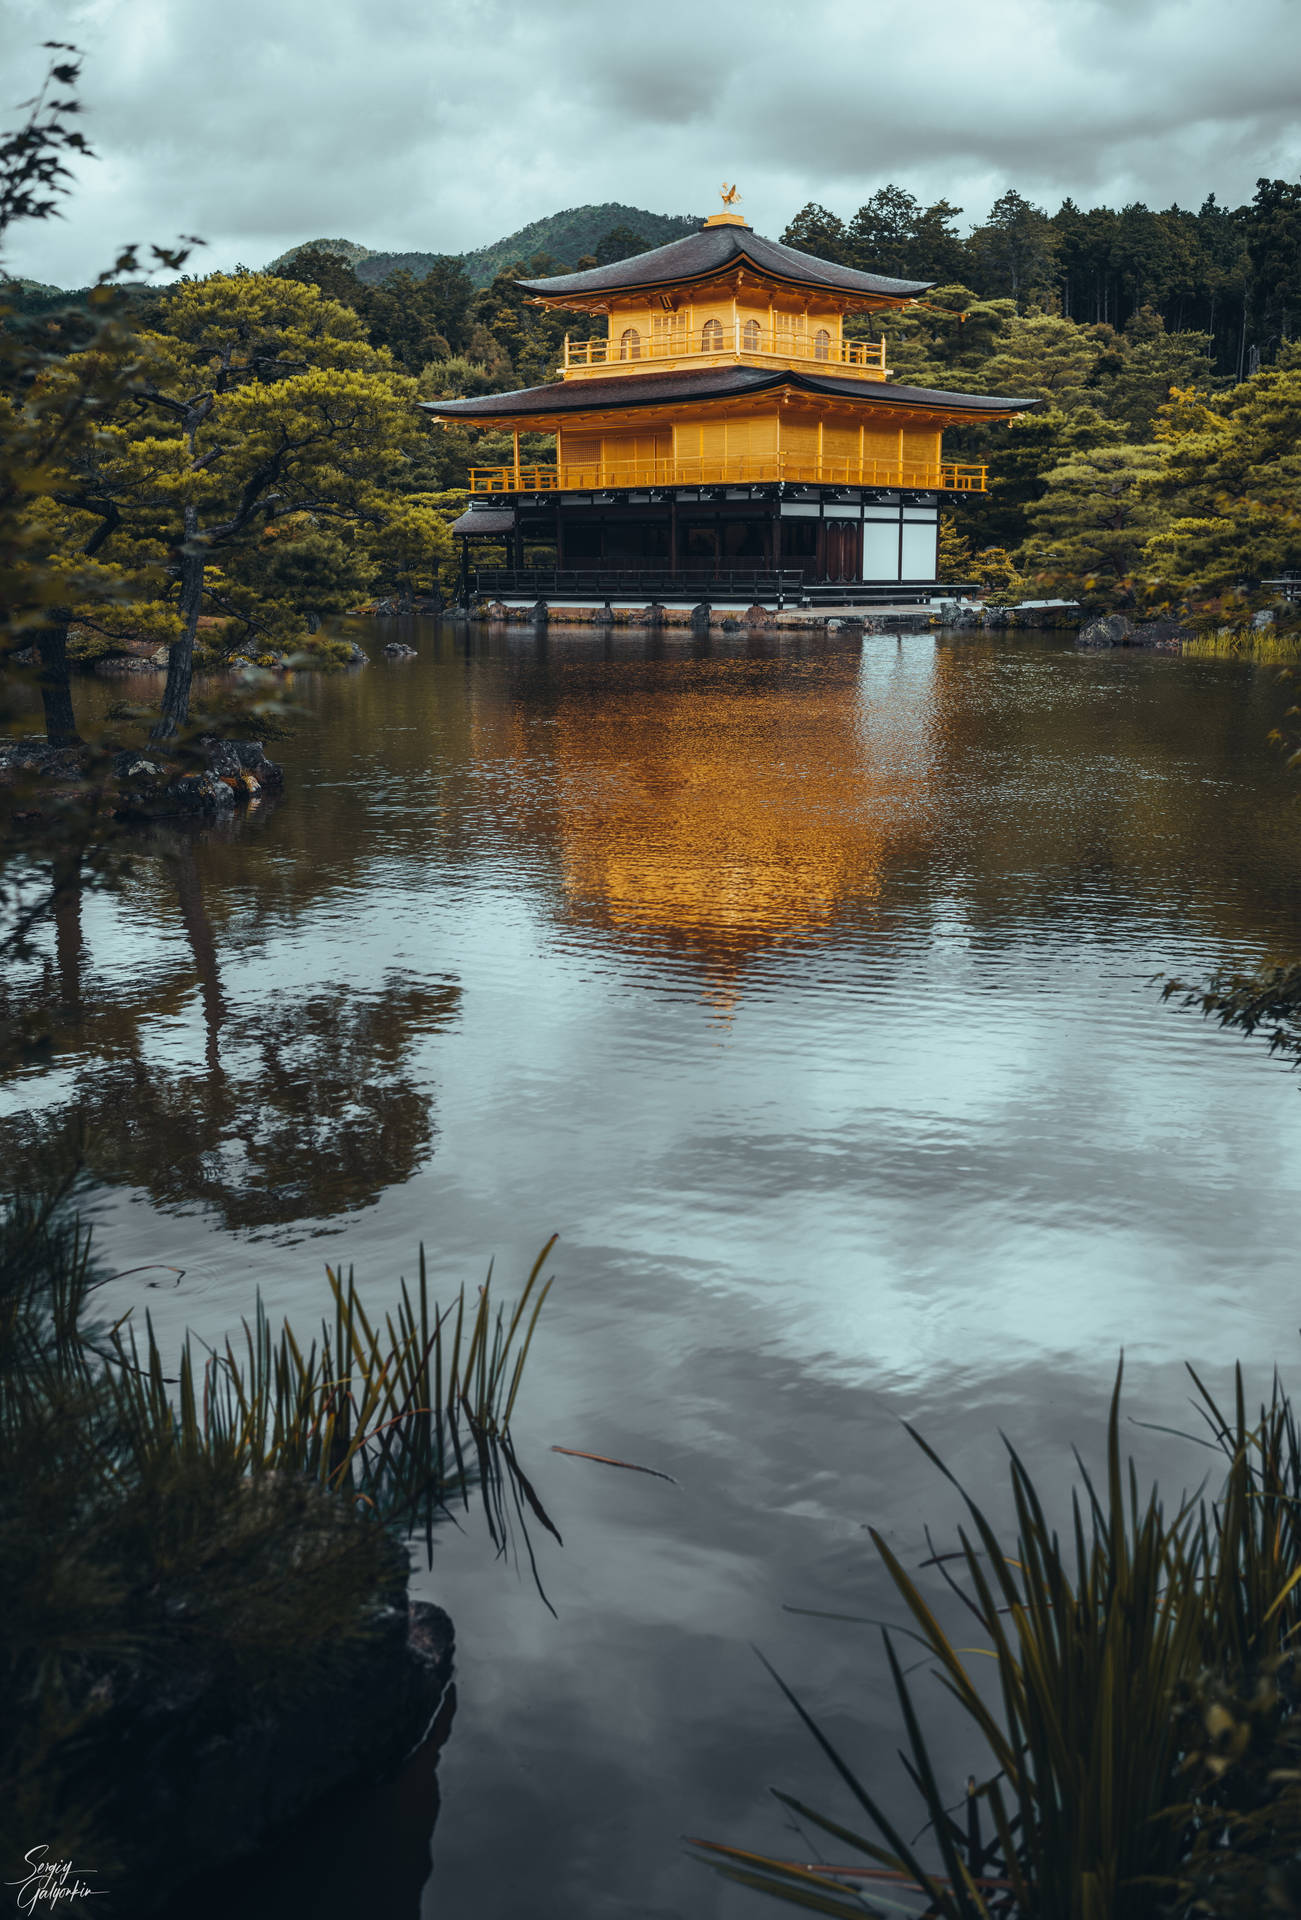 Golden Pavilion Scenery For Iphone Screens